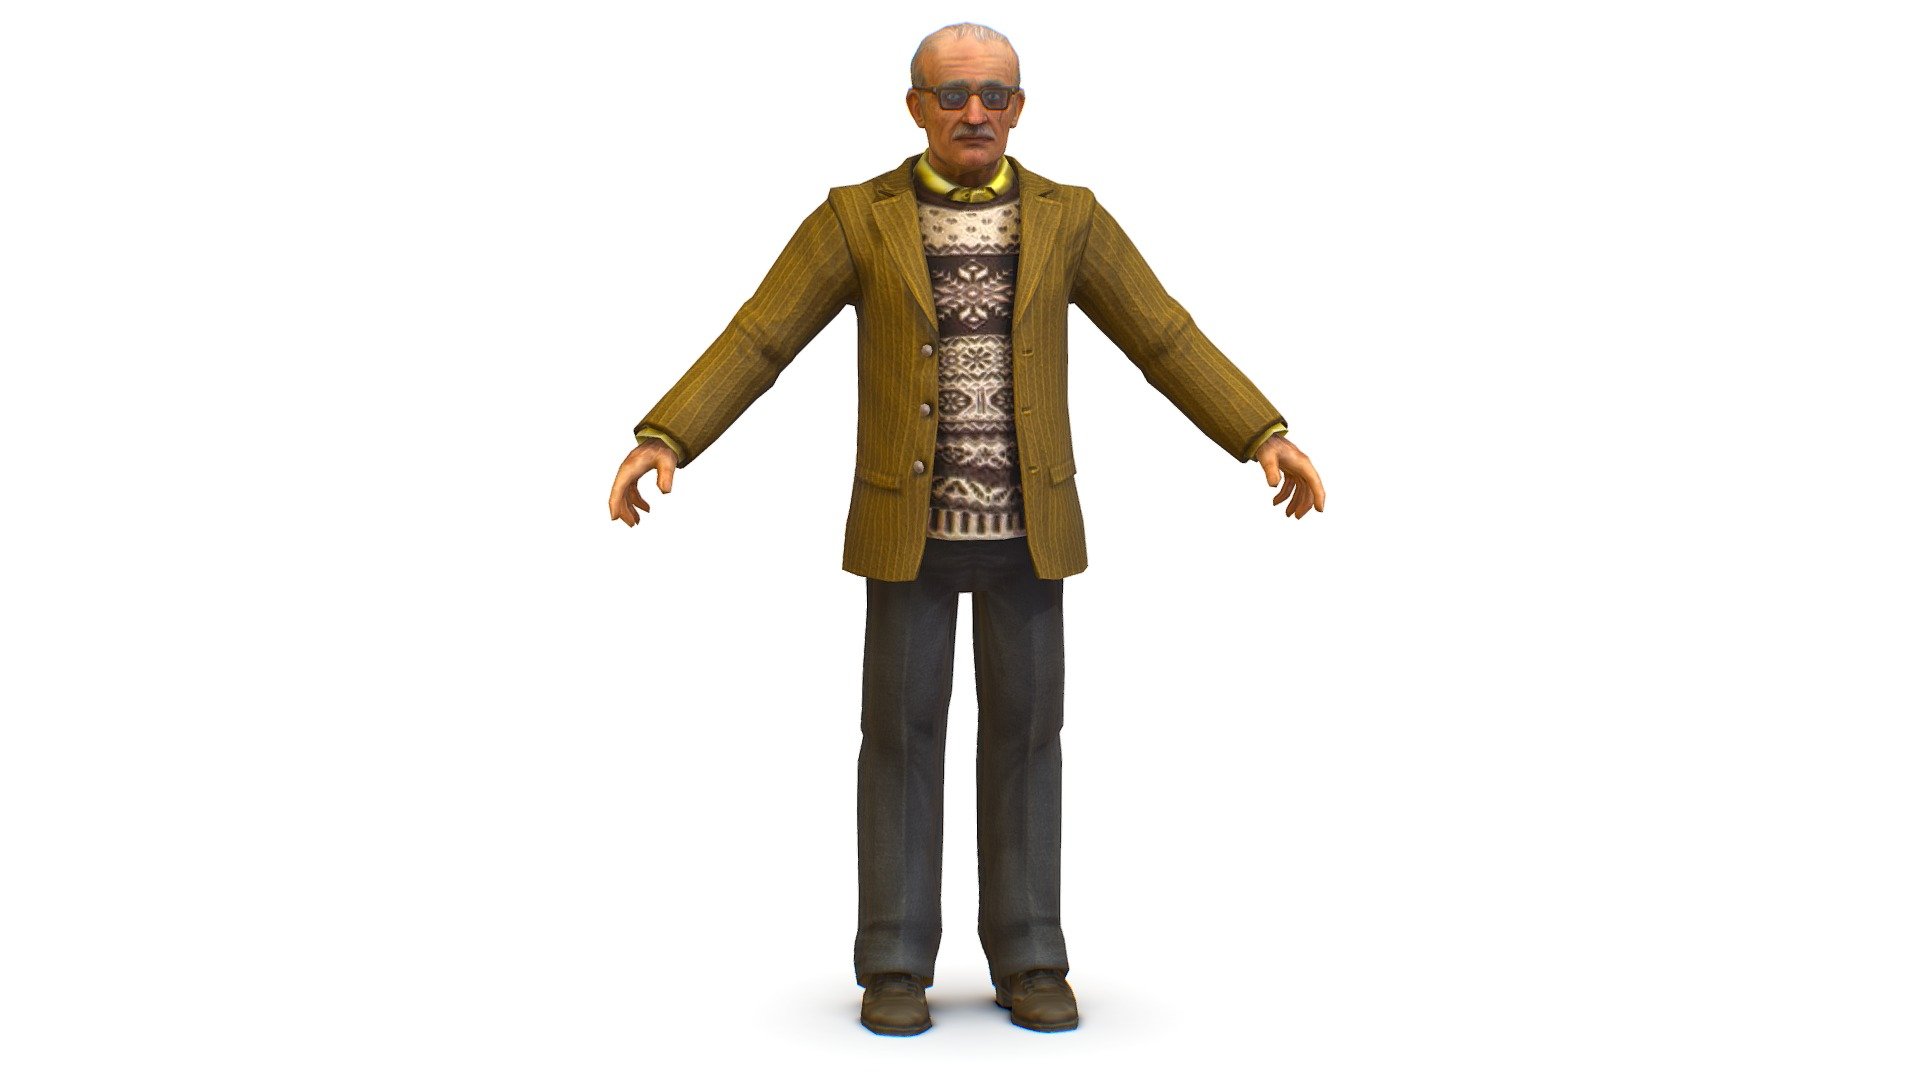 Old Man Professor Sweater Jacket Glasses - 3dsMax file included/ texture 512 color only, head and body 3d model